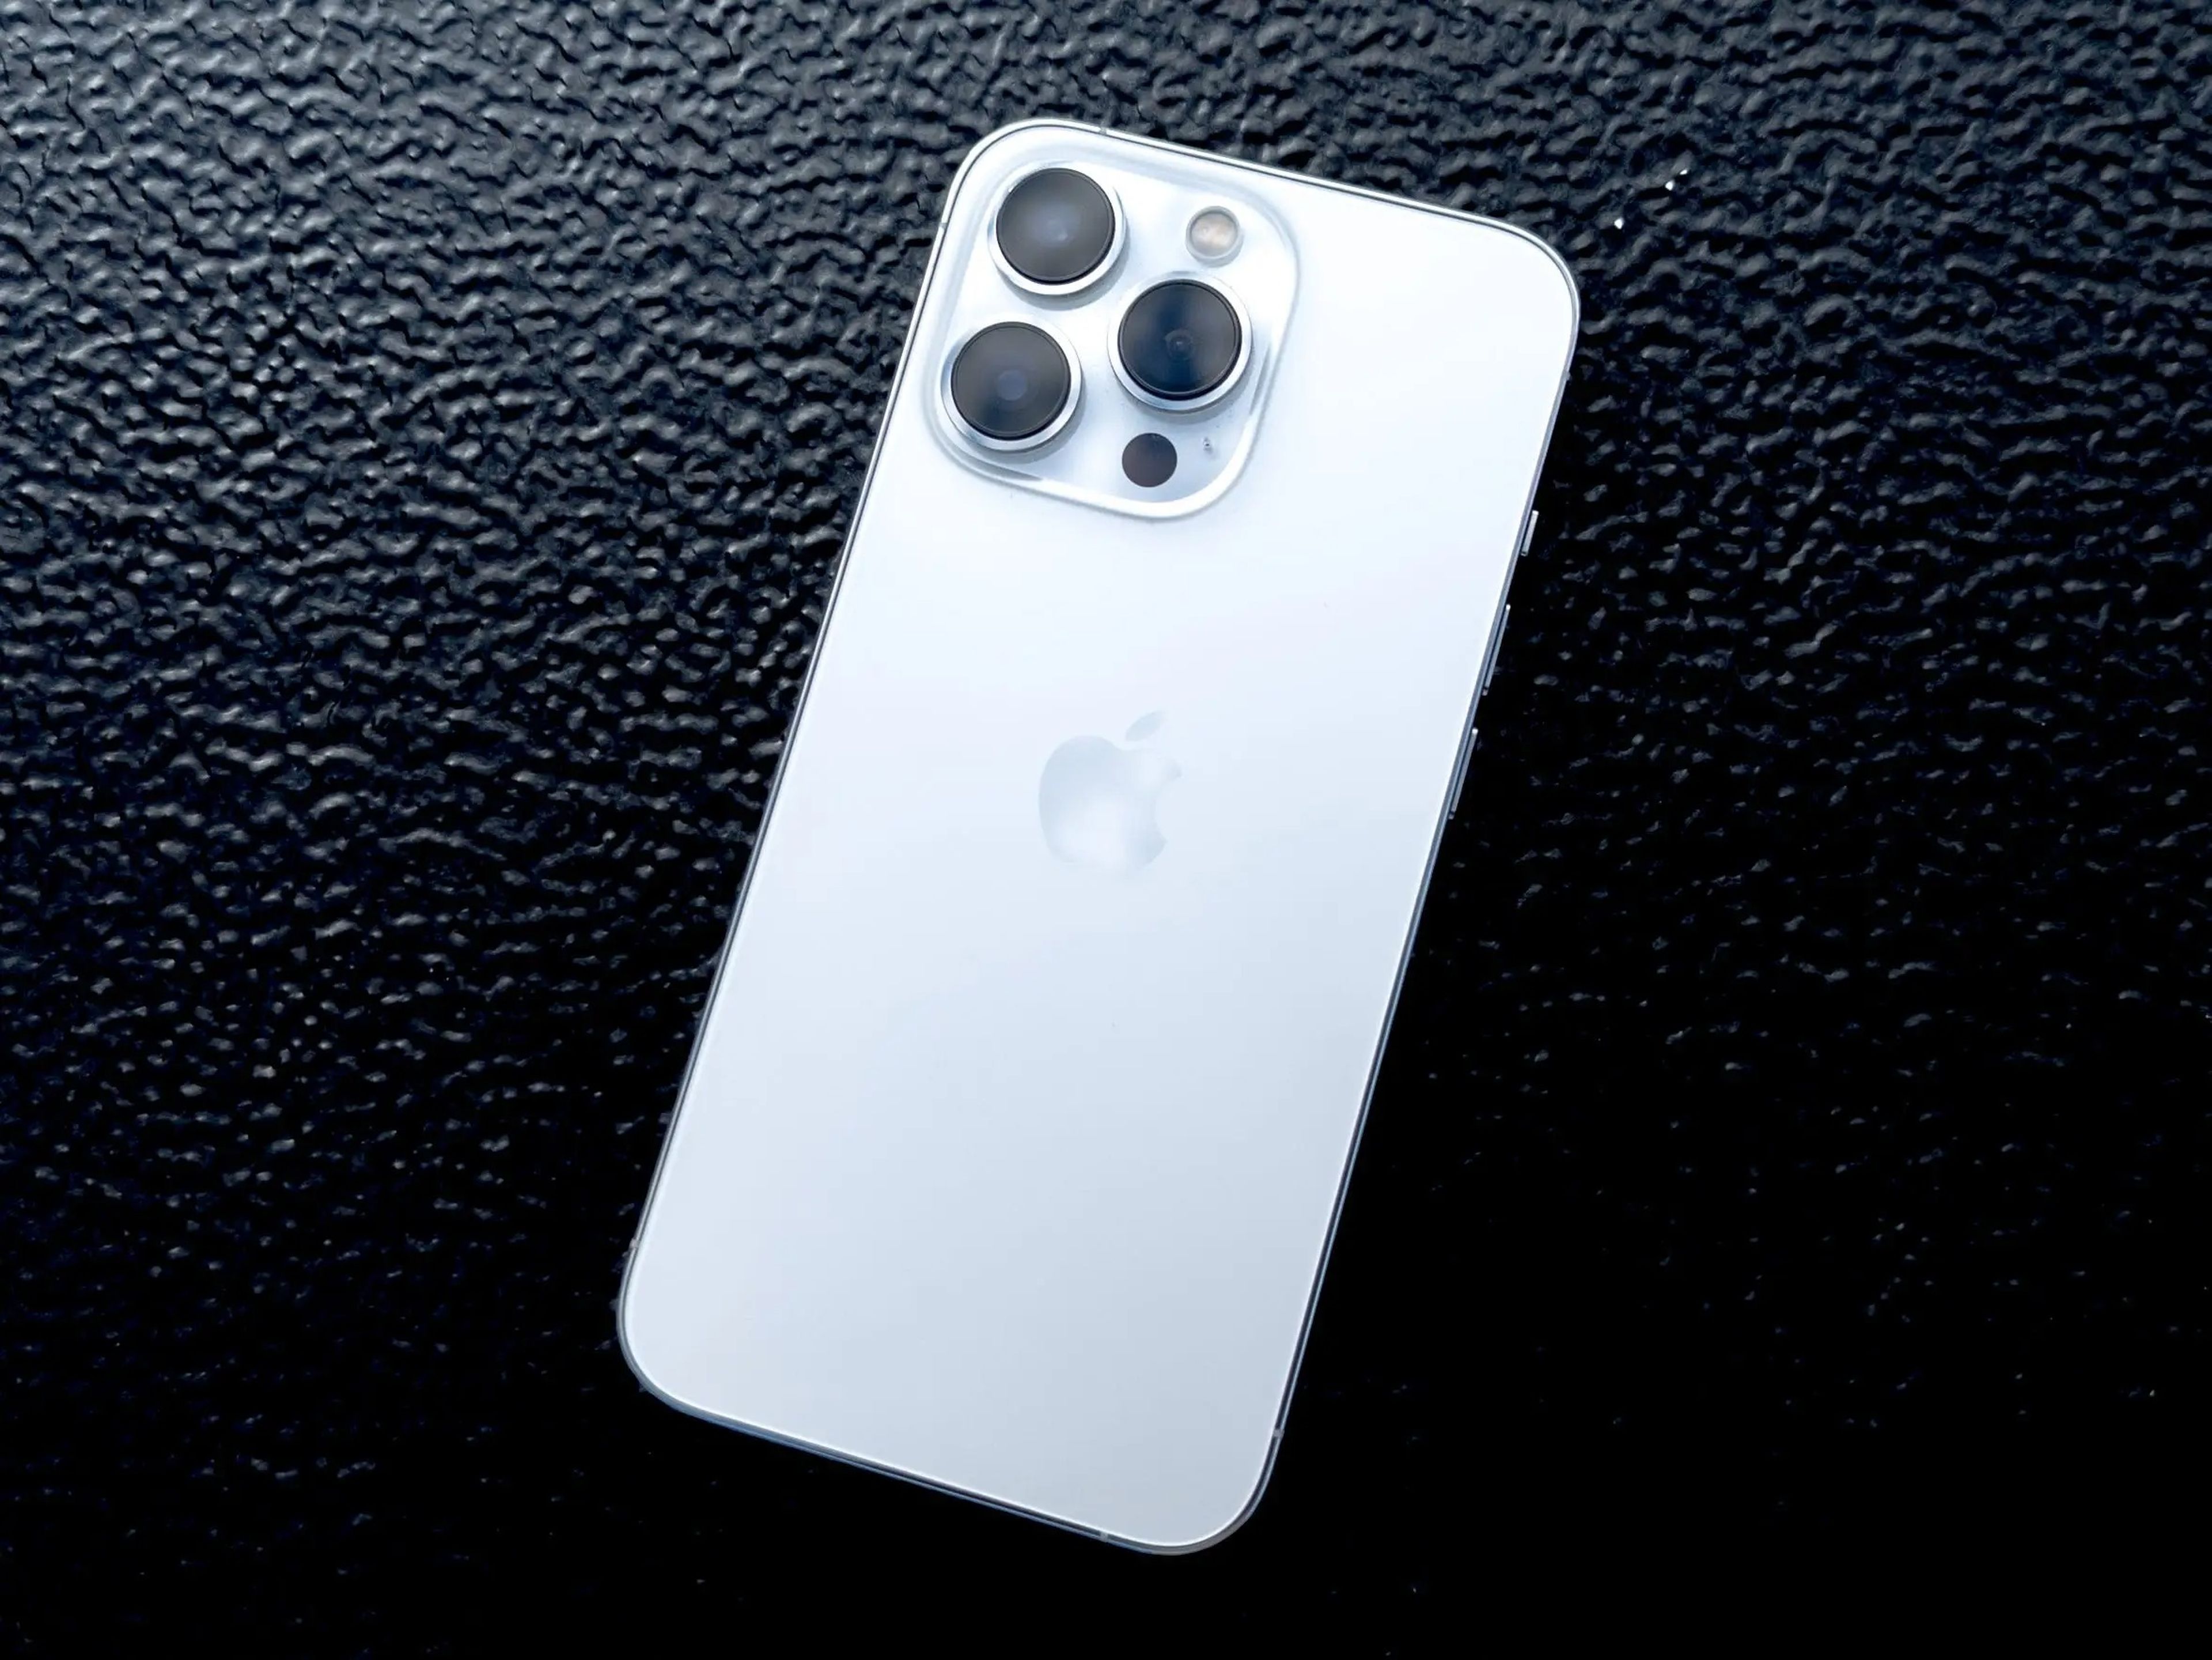 The rear of the iPhone 13 Pro in white